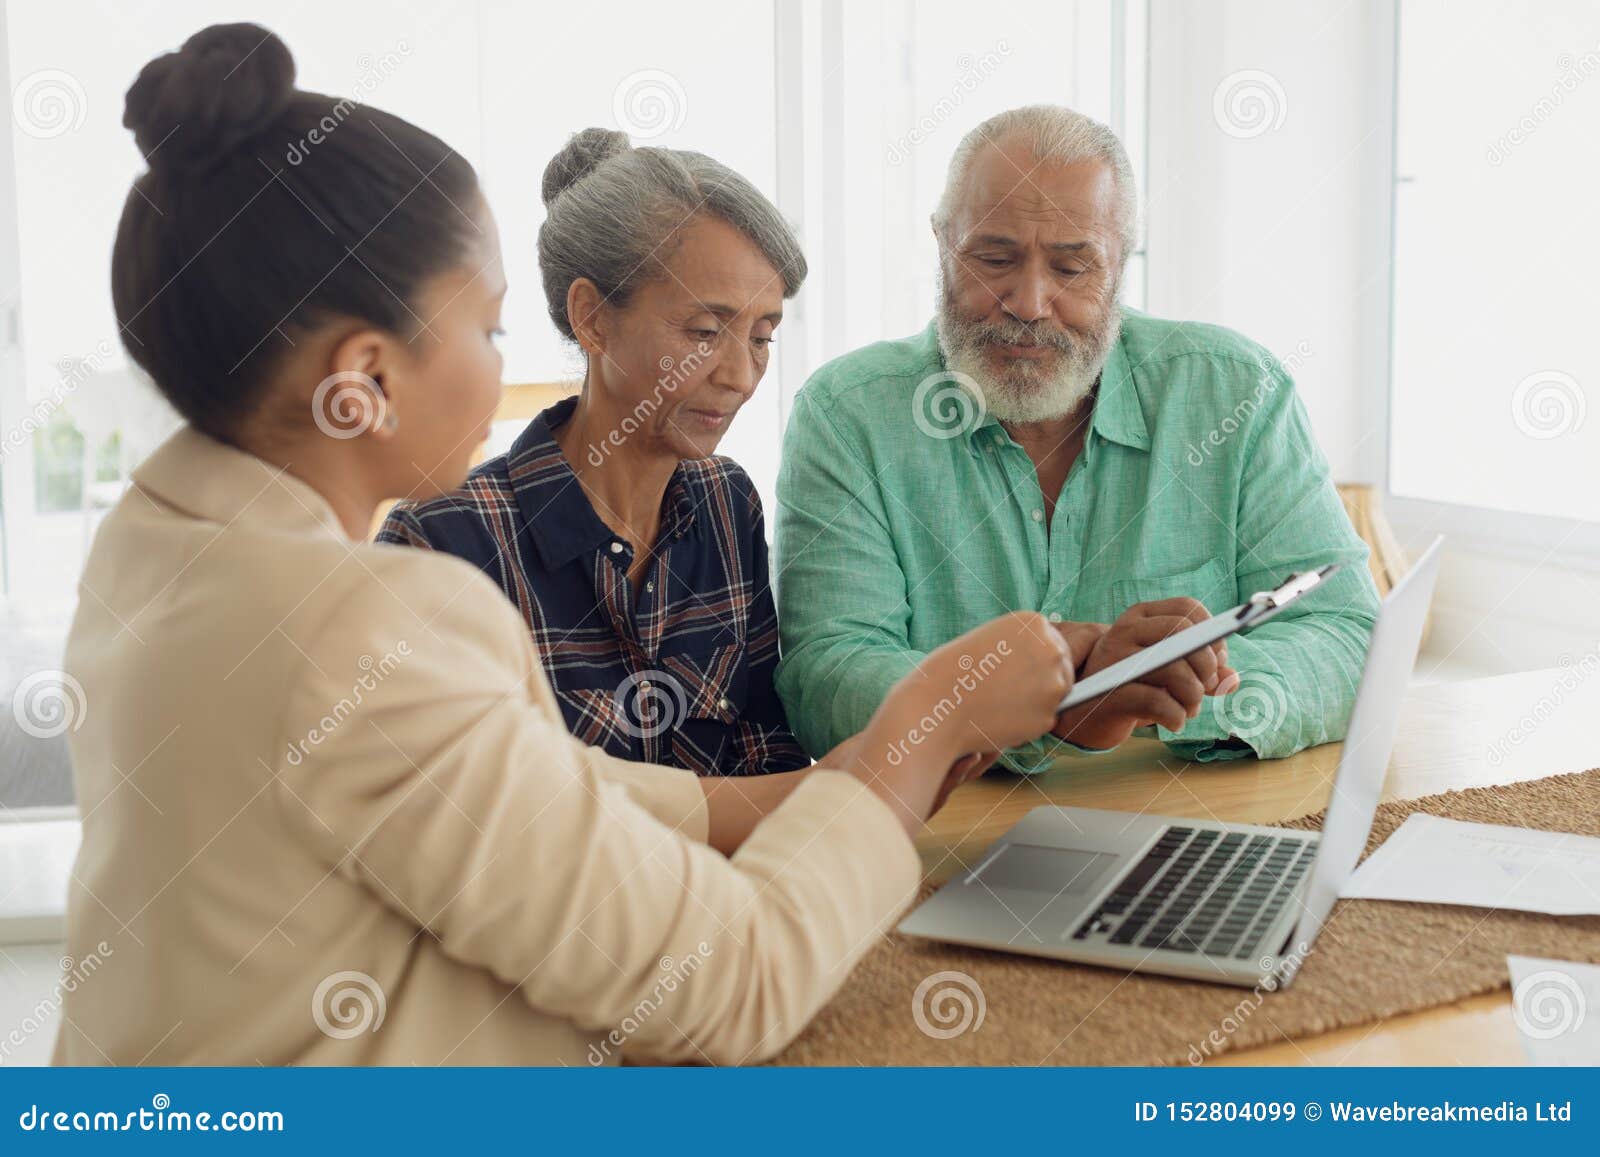 financial adviser discussing information with a couple